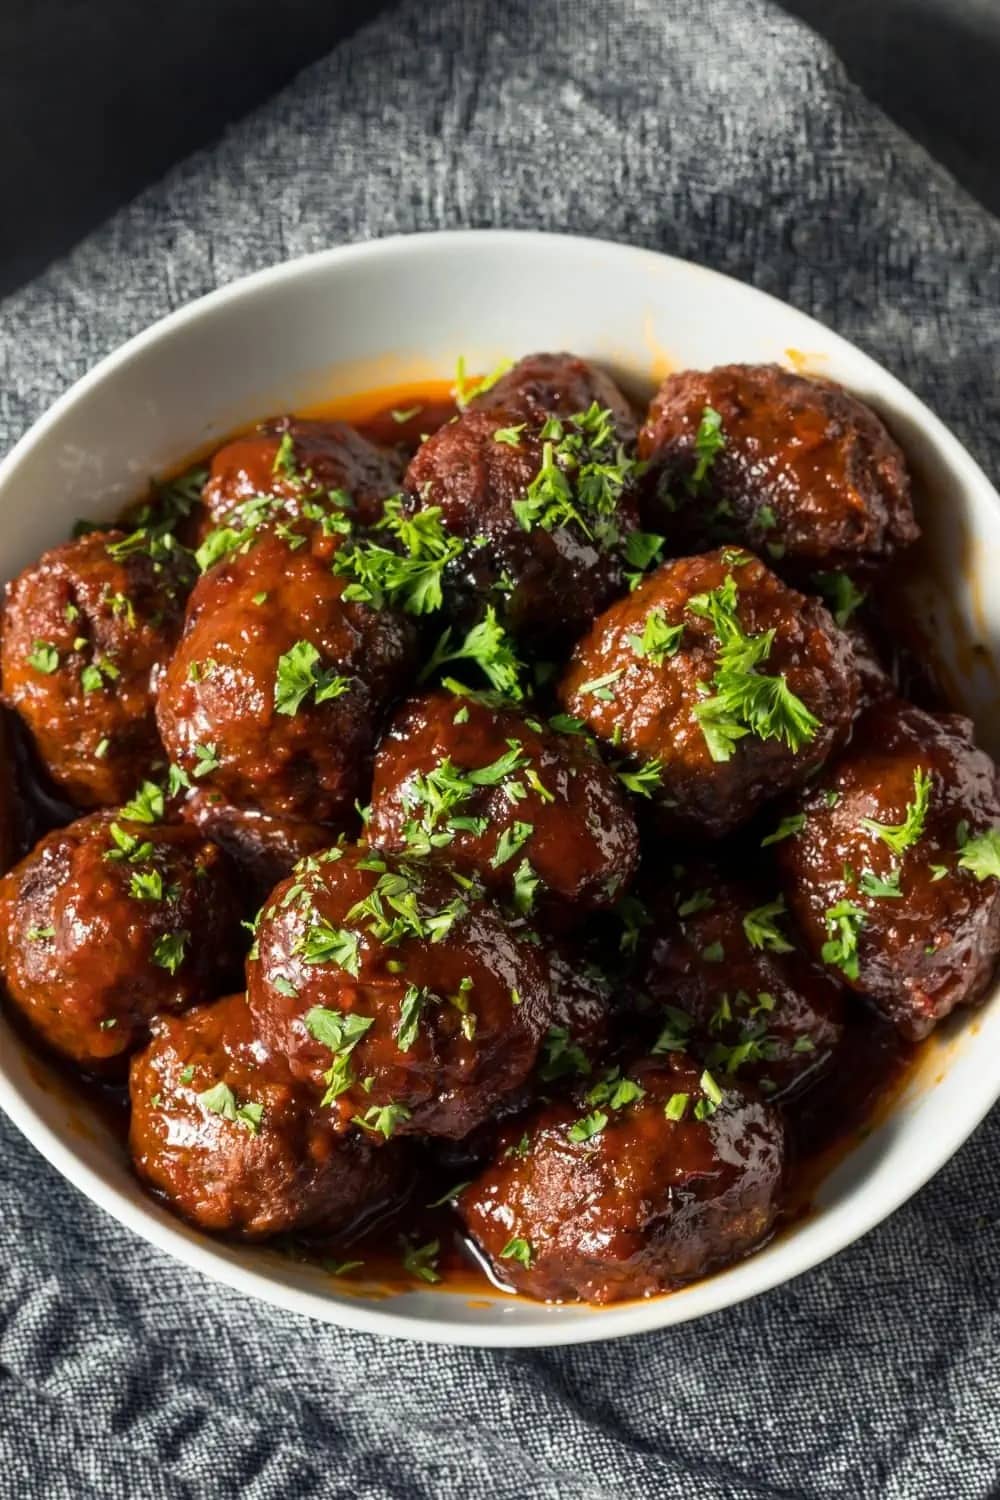 Bowl of homemade Air Fryer Meatballs garnished with chopped parsley